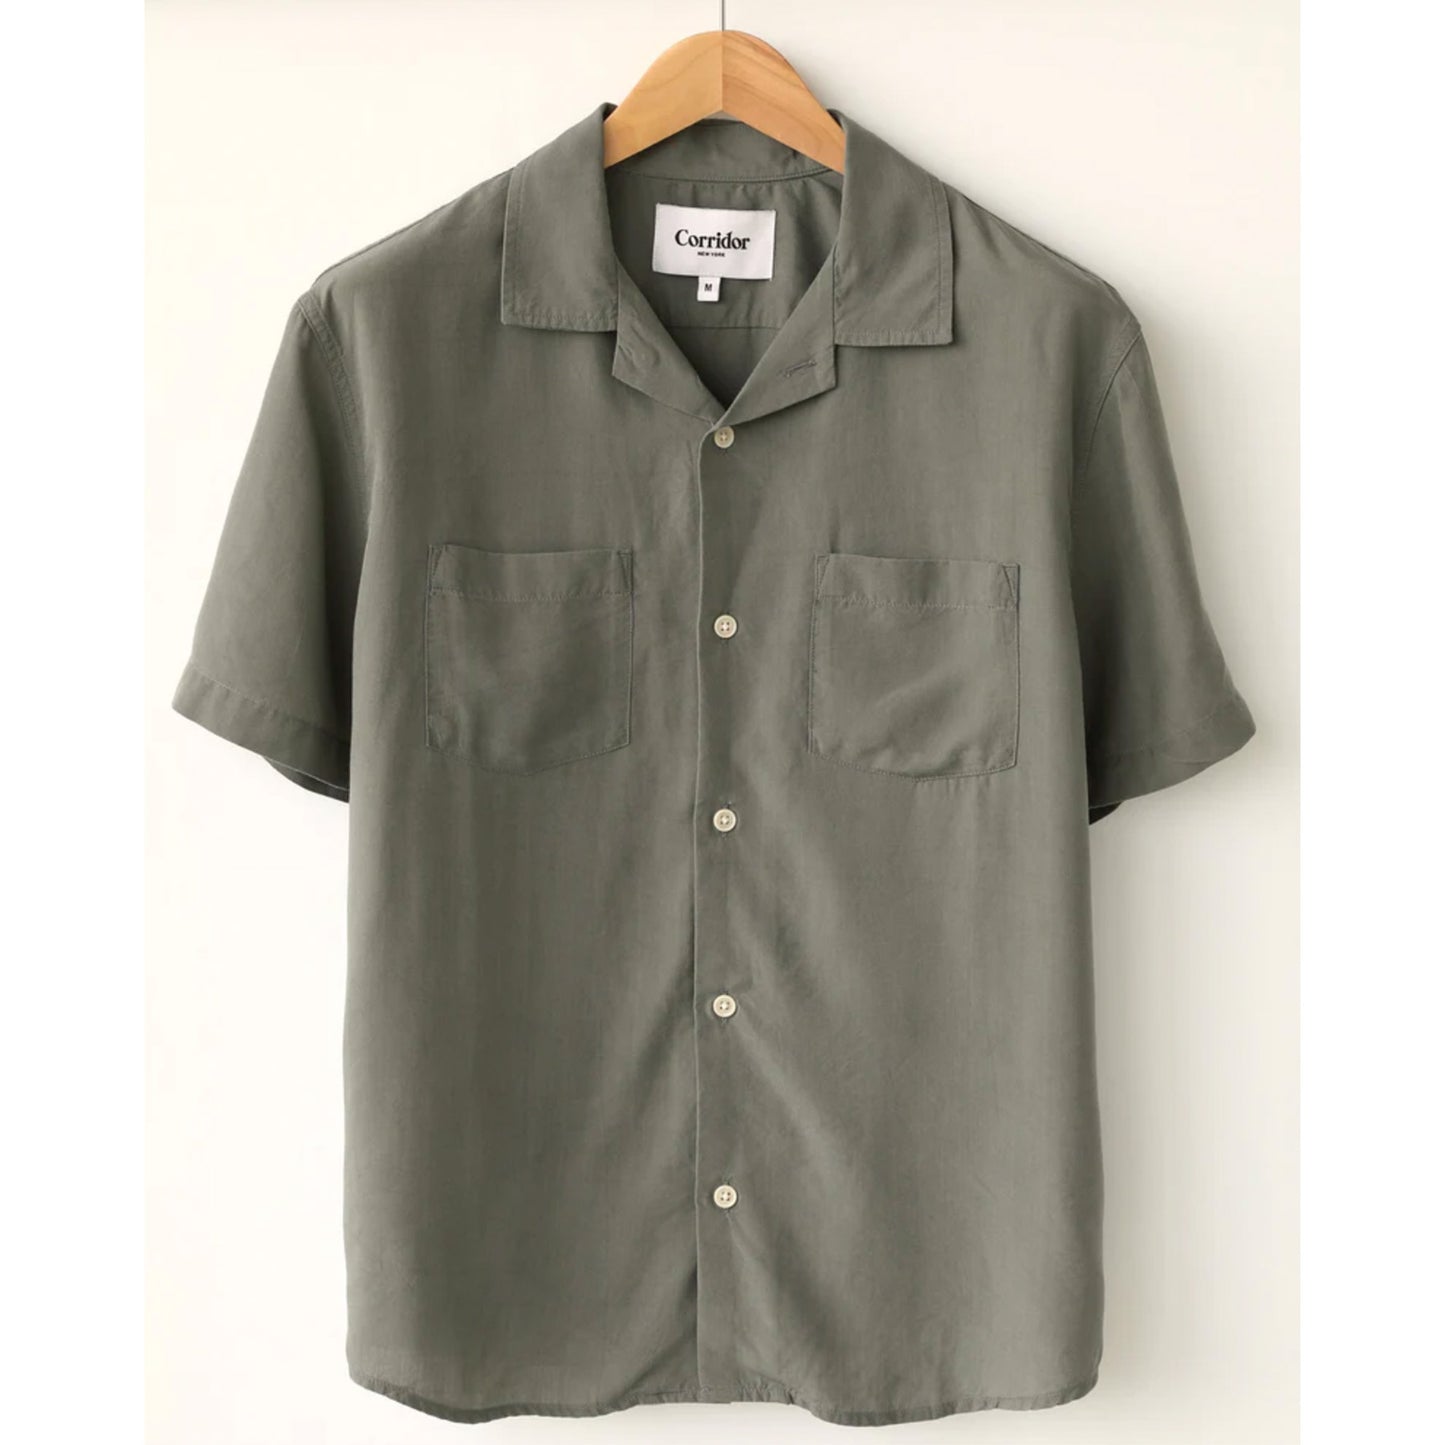 Lyocell Camp Shirt in Army